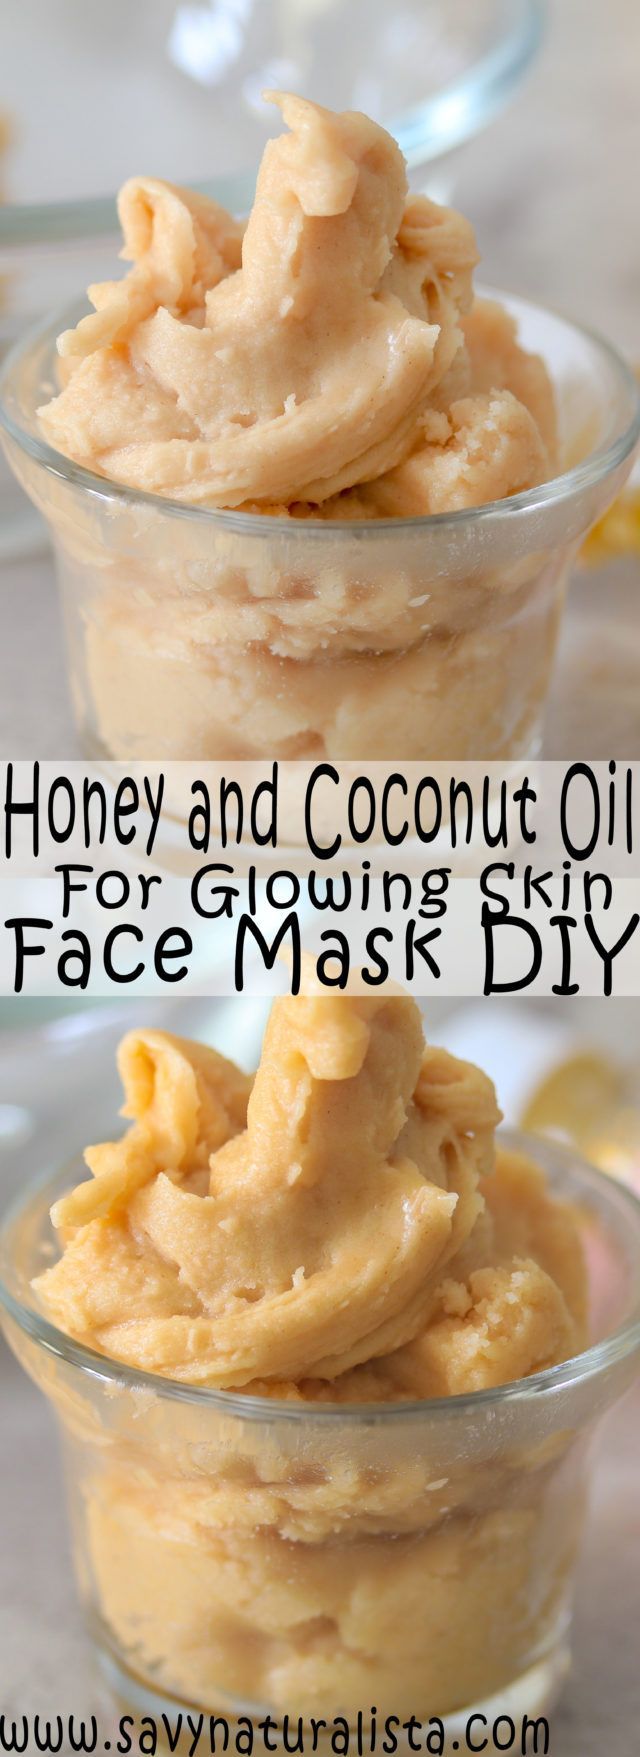 Honey and Coconut Oil Glowing Face Mask -   16 makeup Noche coconut oil ideas